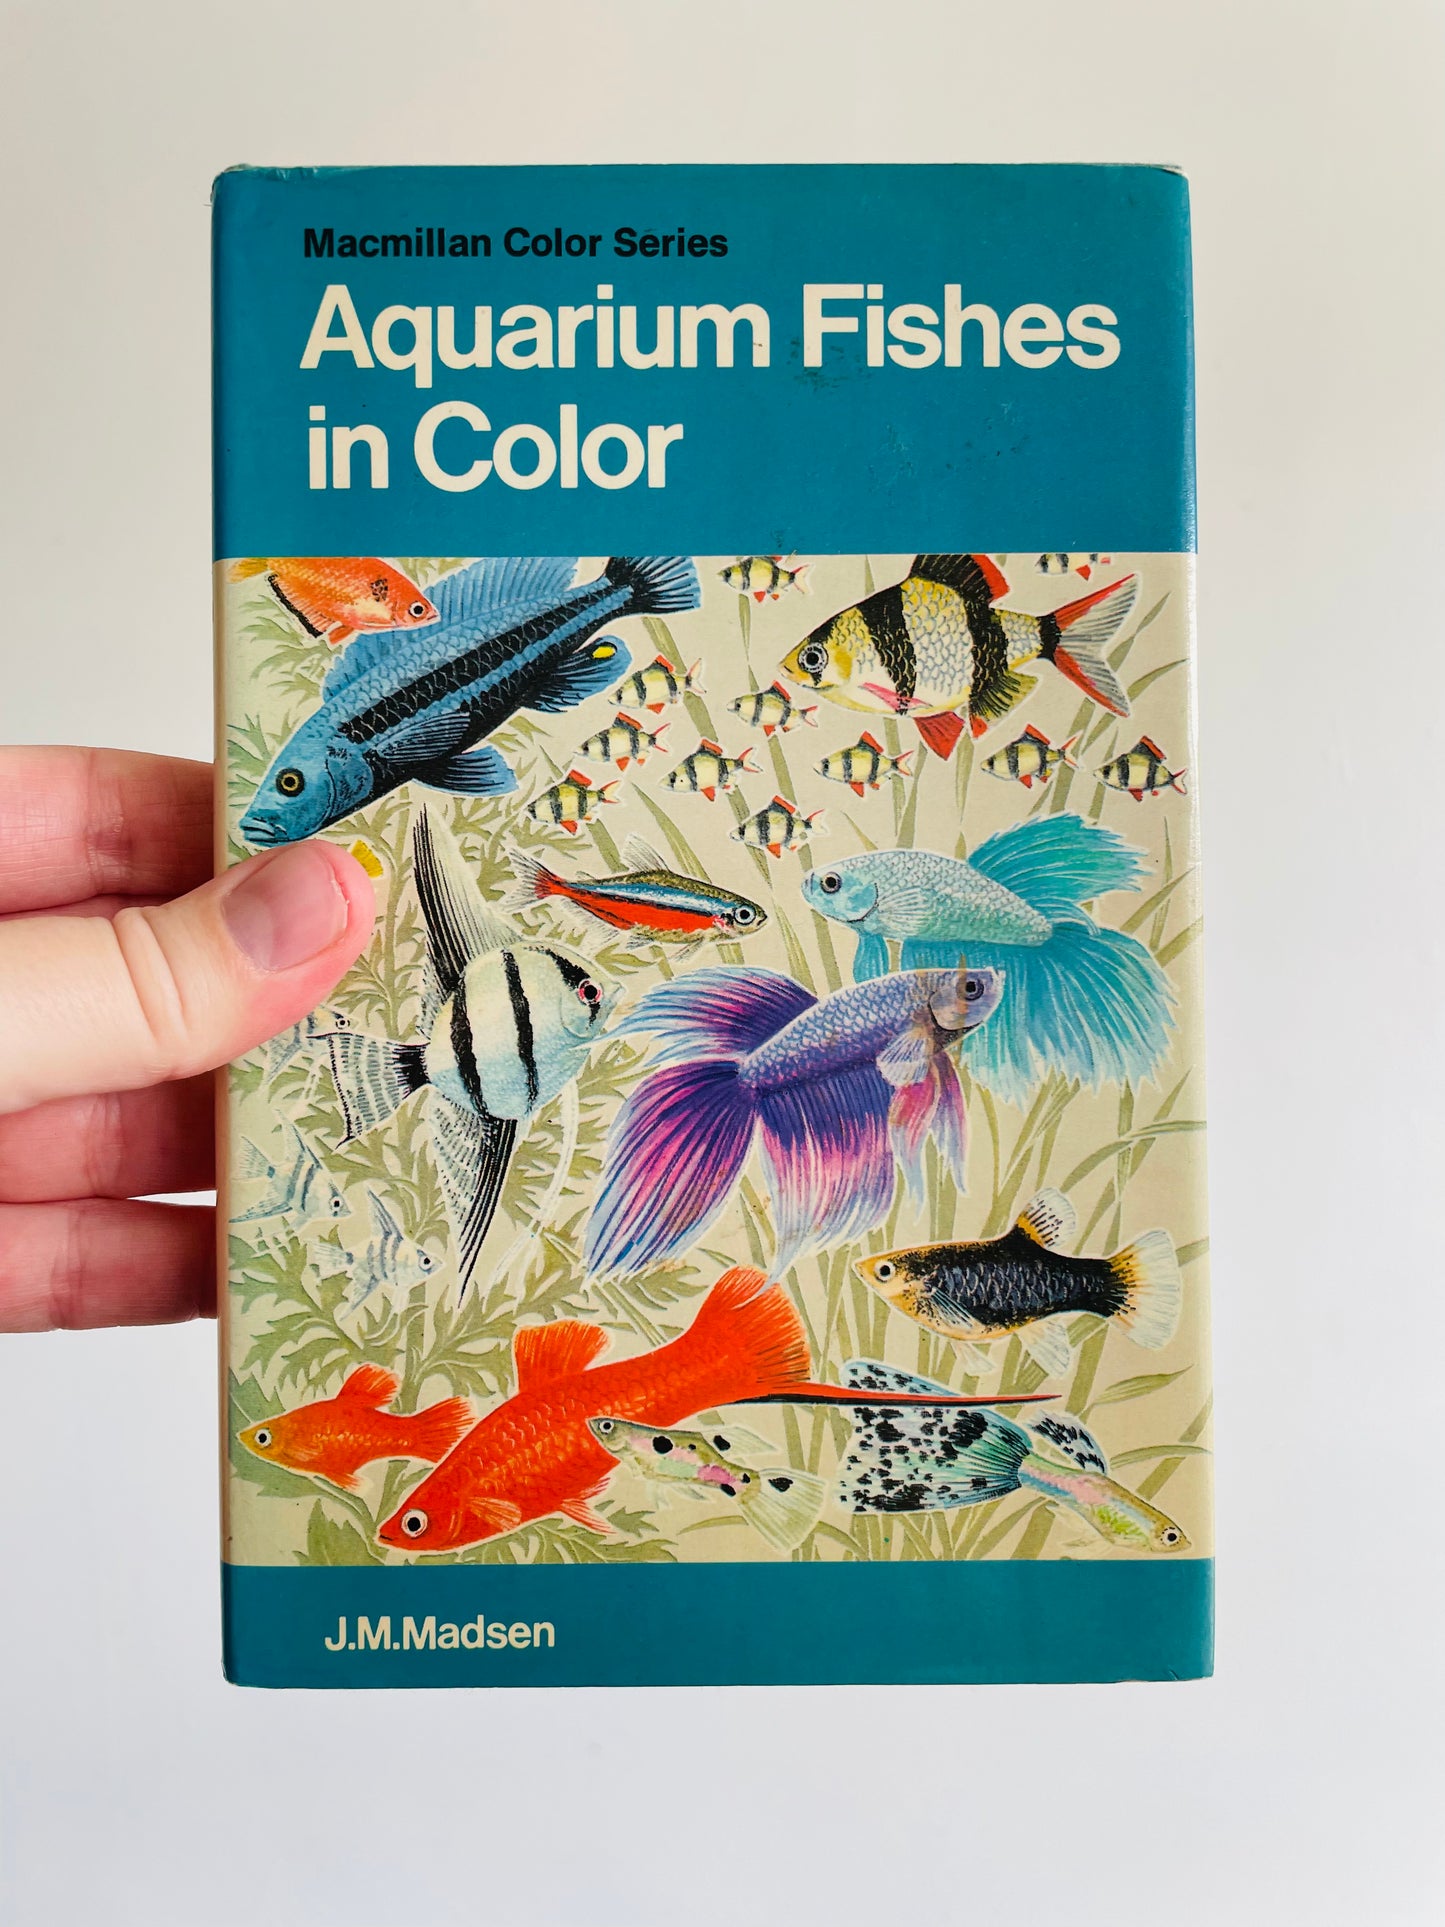 Macmillan Color Series - Aquarium Fishes in Color Hardcover Book by J. M. Madsen (1975)